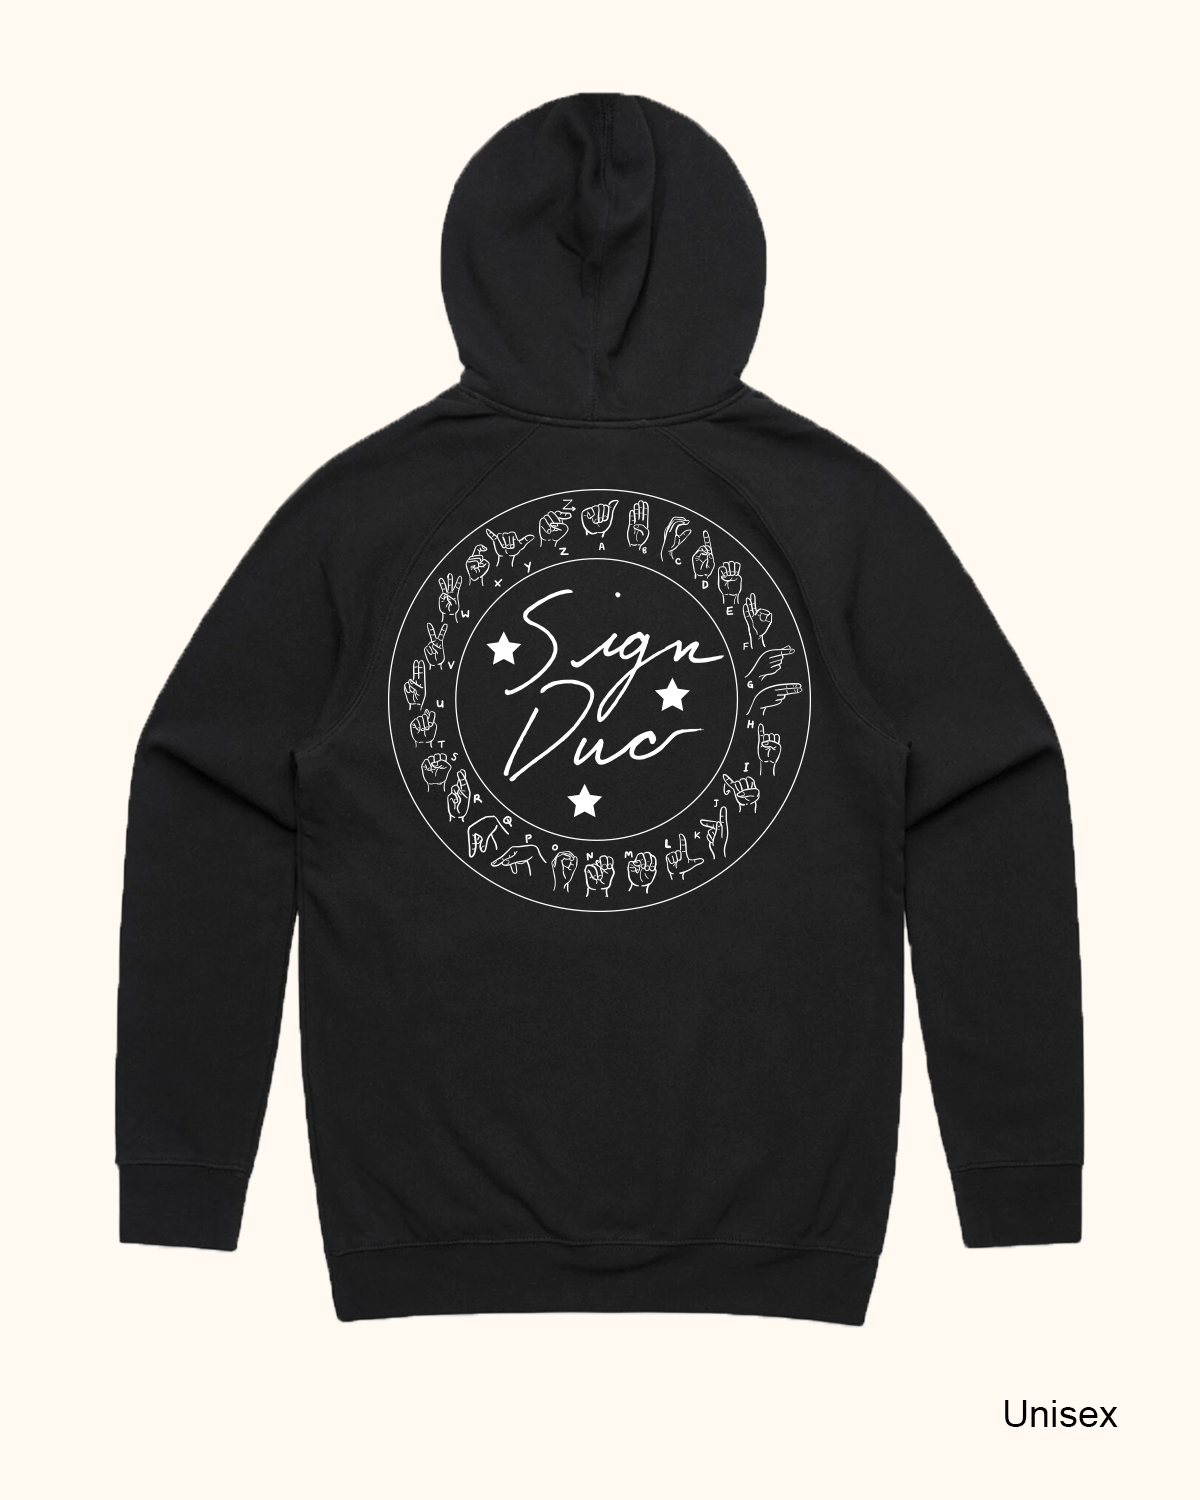 Sign Duo "I'm Not Faking It" Hoodie